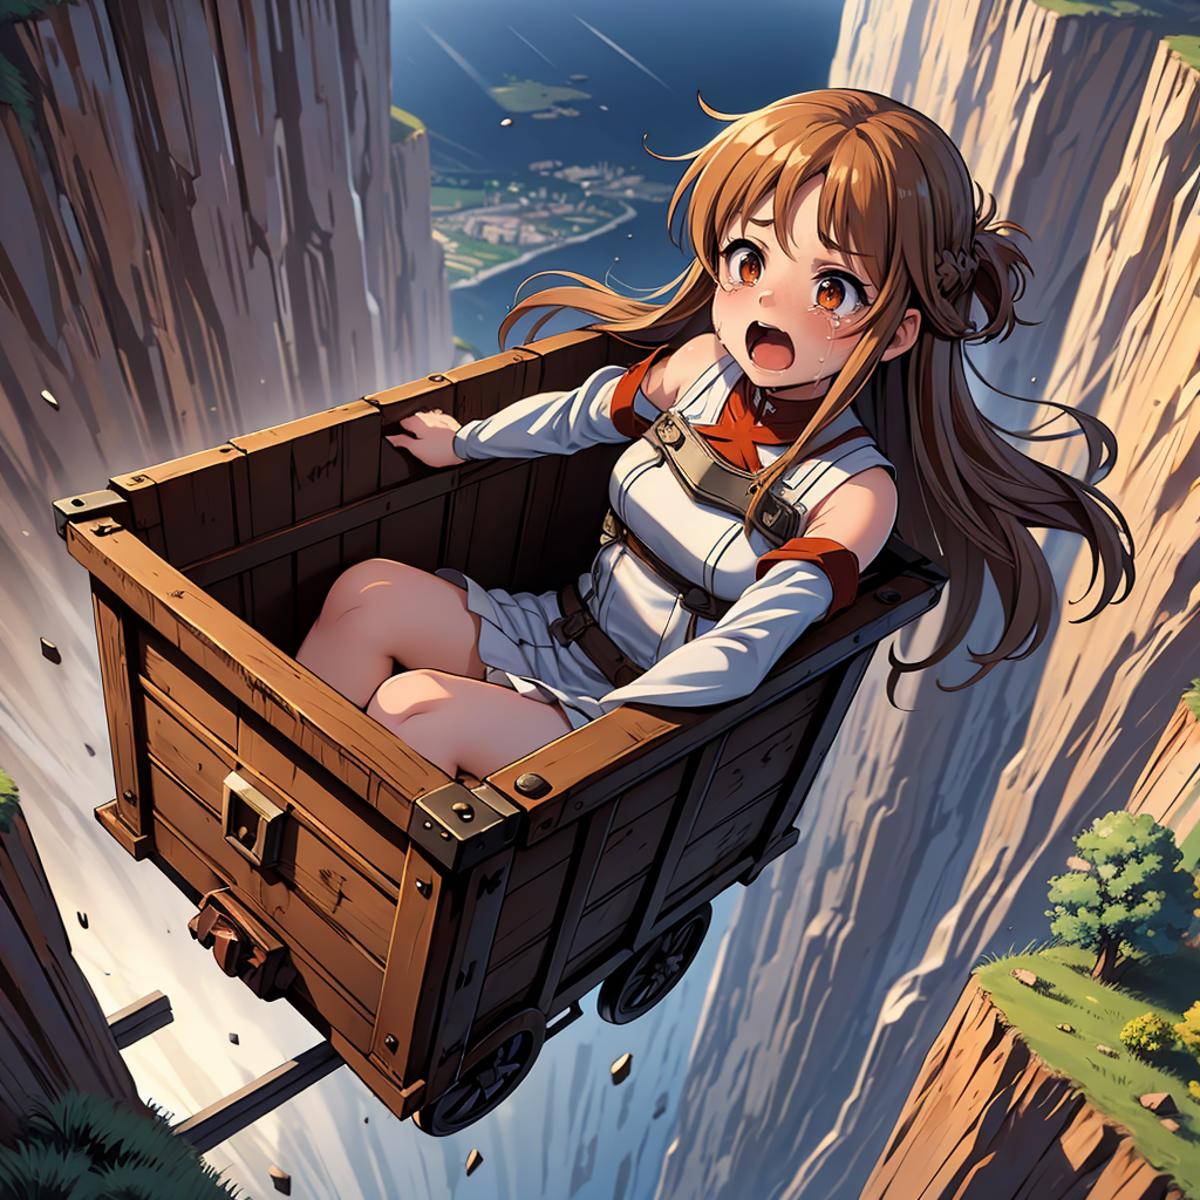 A young girl is riding in a wooden crate that is being pulled by a rope.